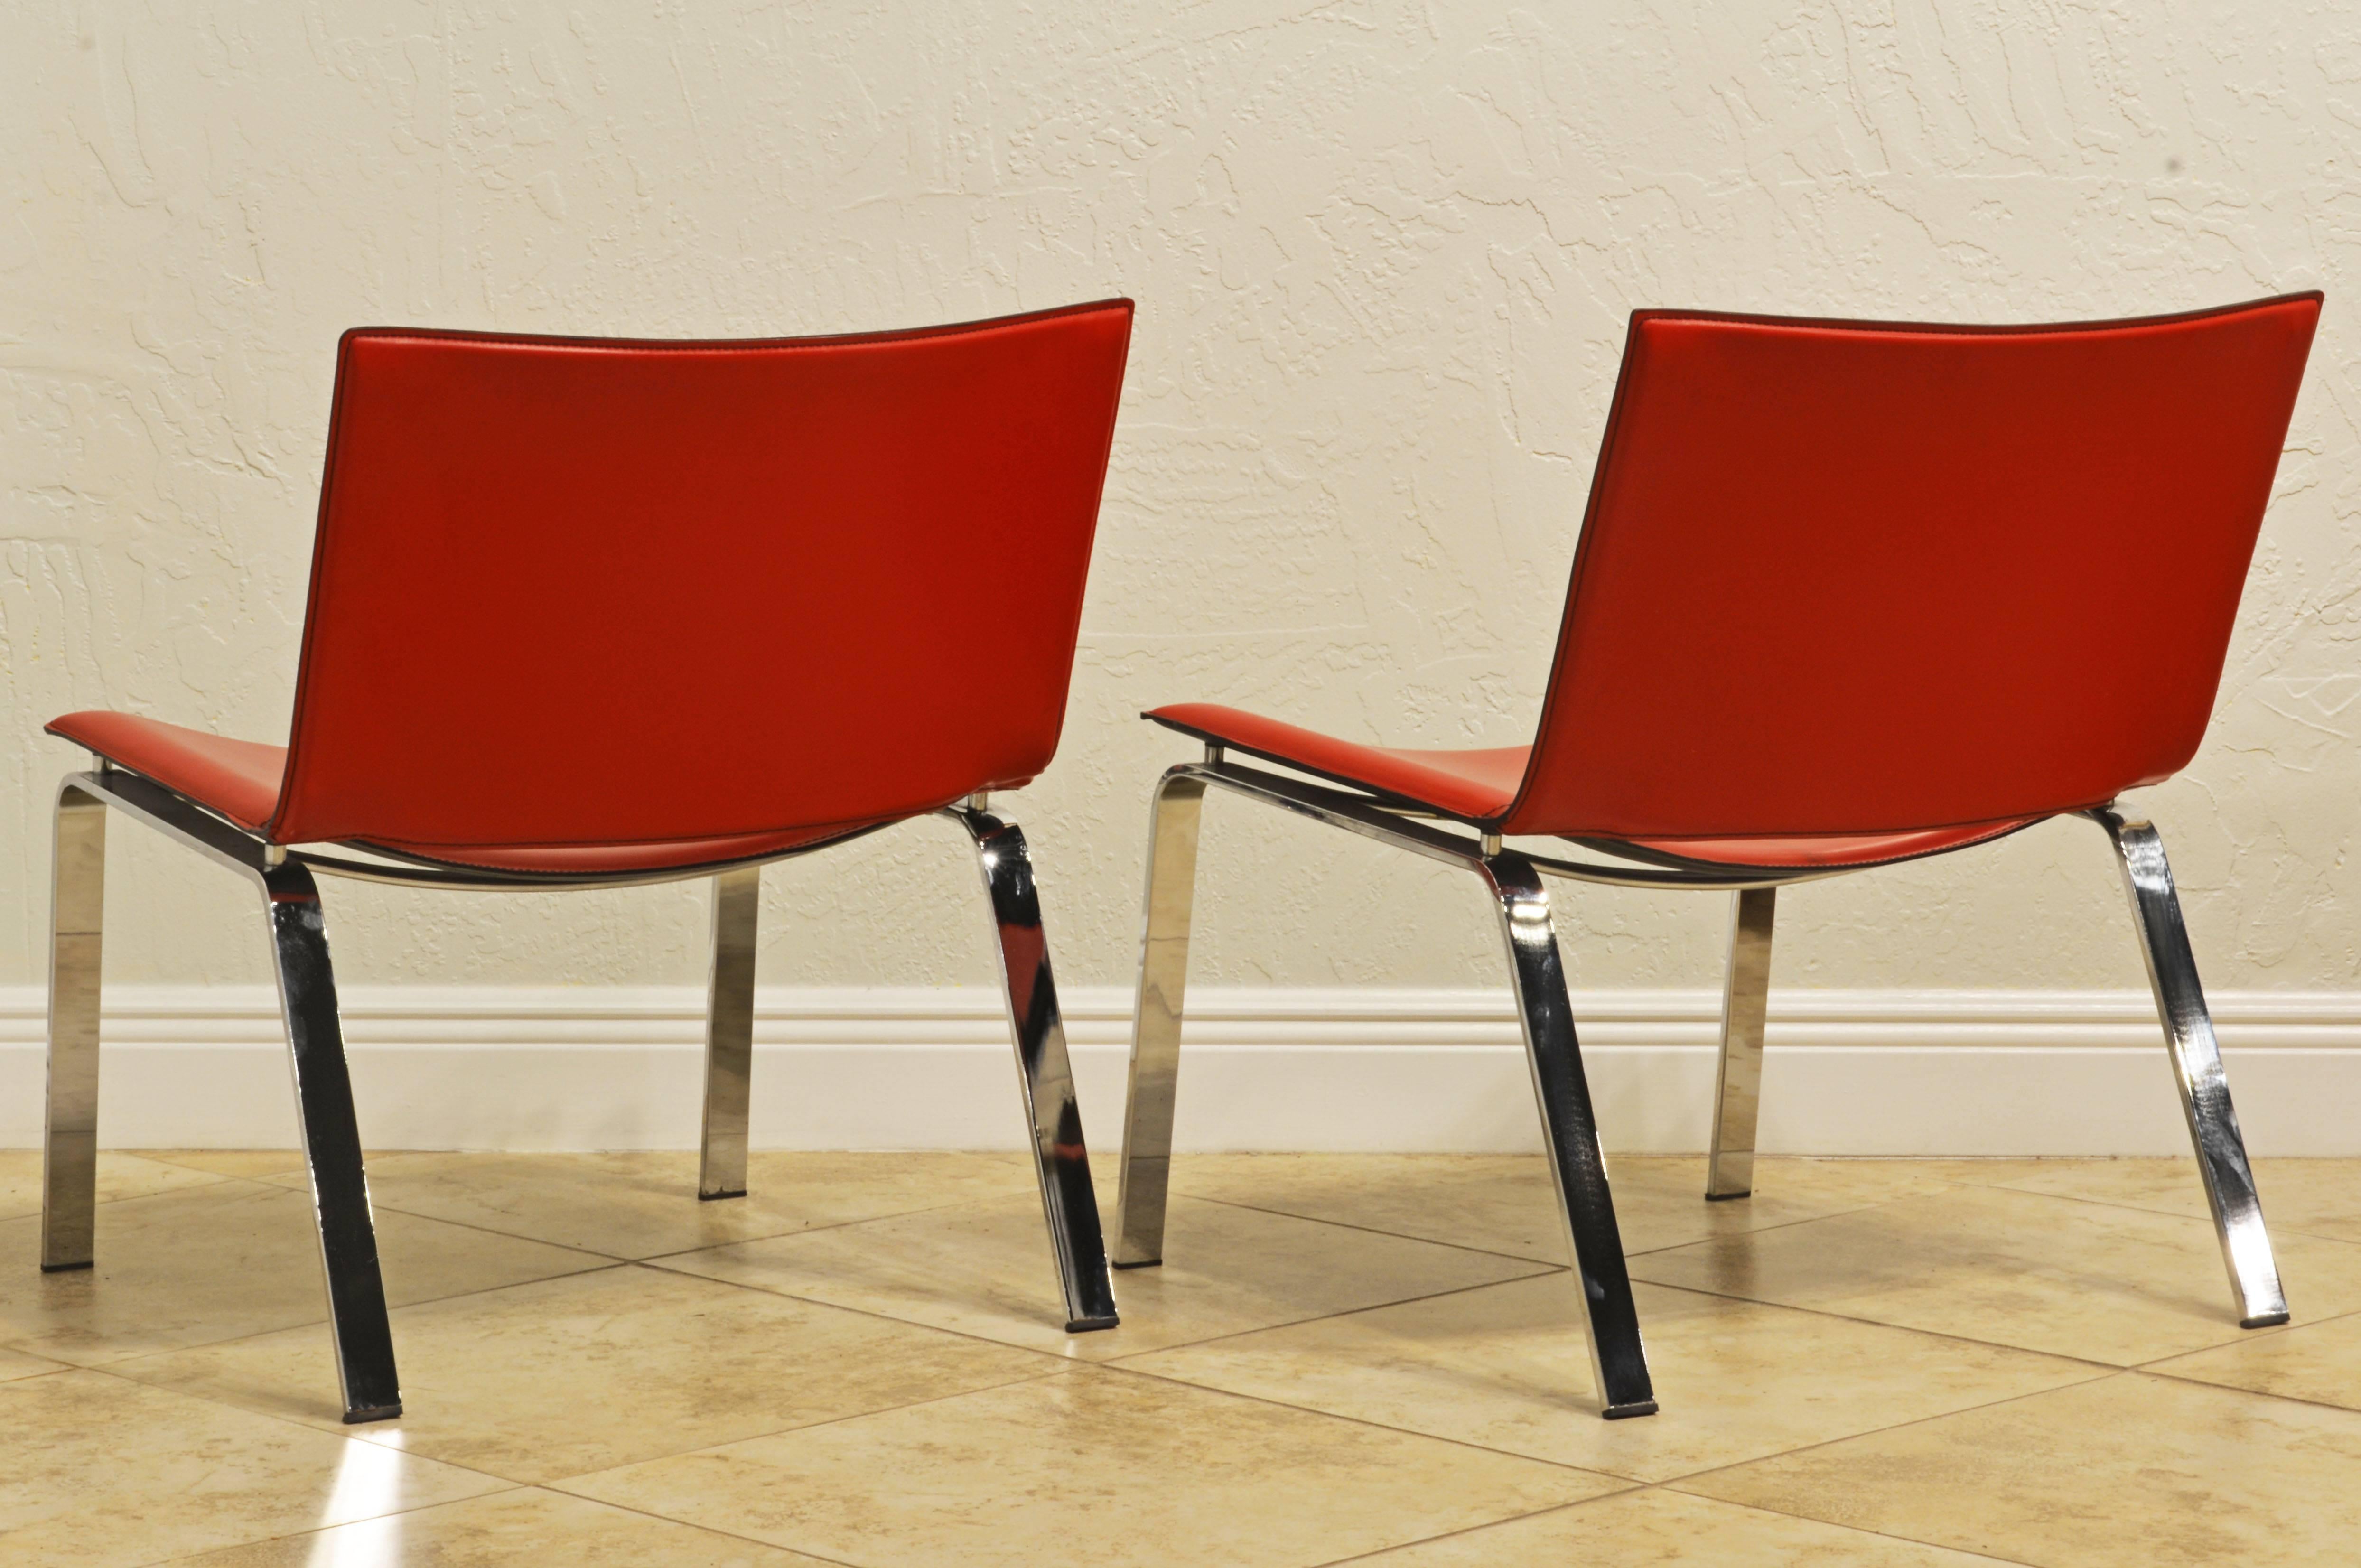 Polished Pair of Vintage Italian Red Leather and Steel Lounge Chairs by Cattelan Italia